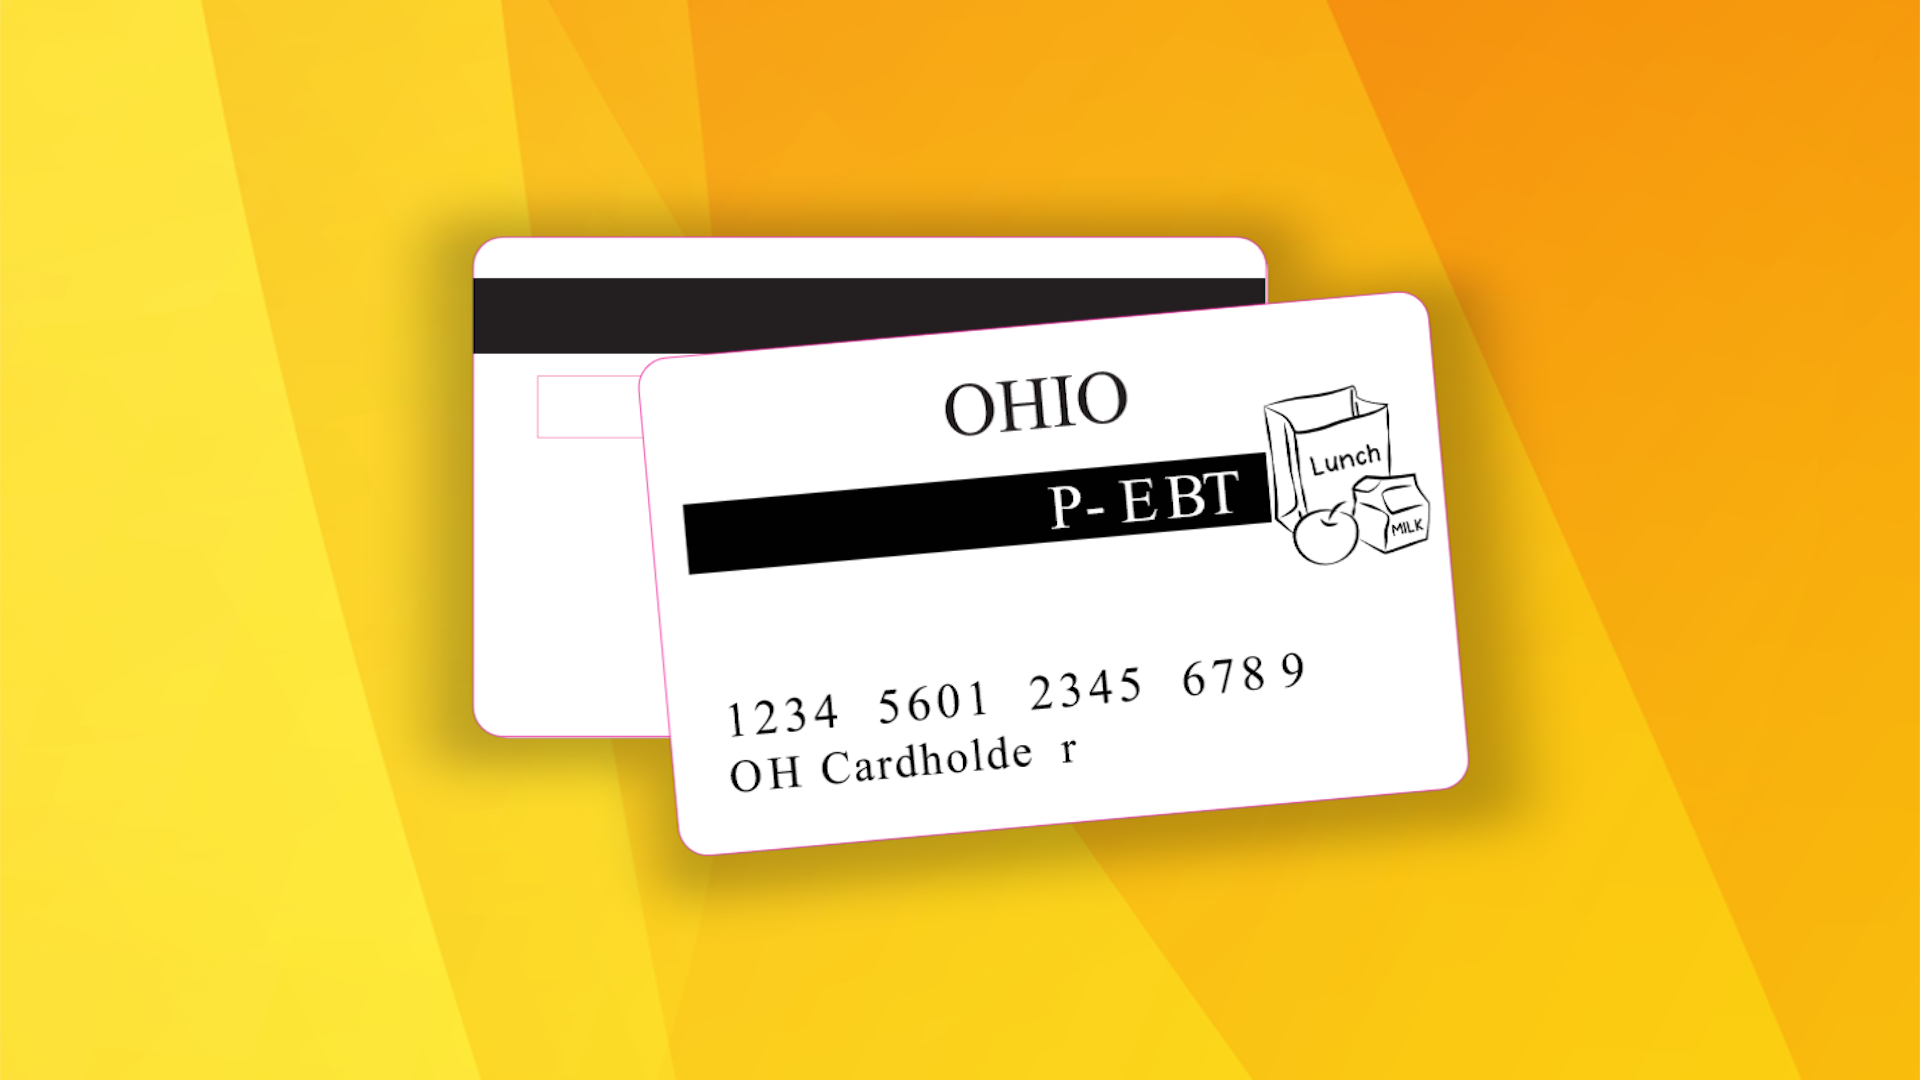 PEBT Cards Mailed To Ohio Students Who Receive Free School Lunches